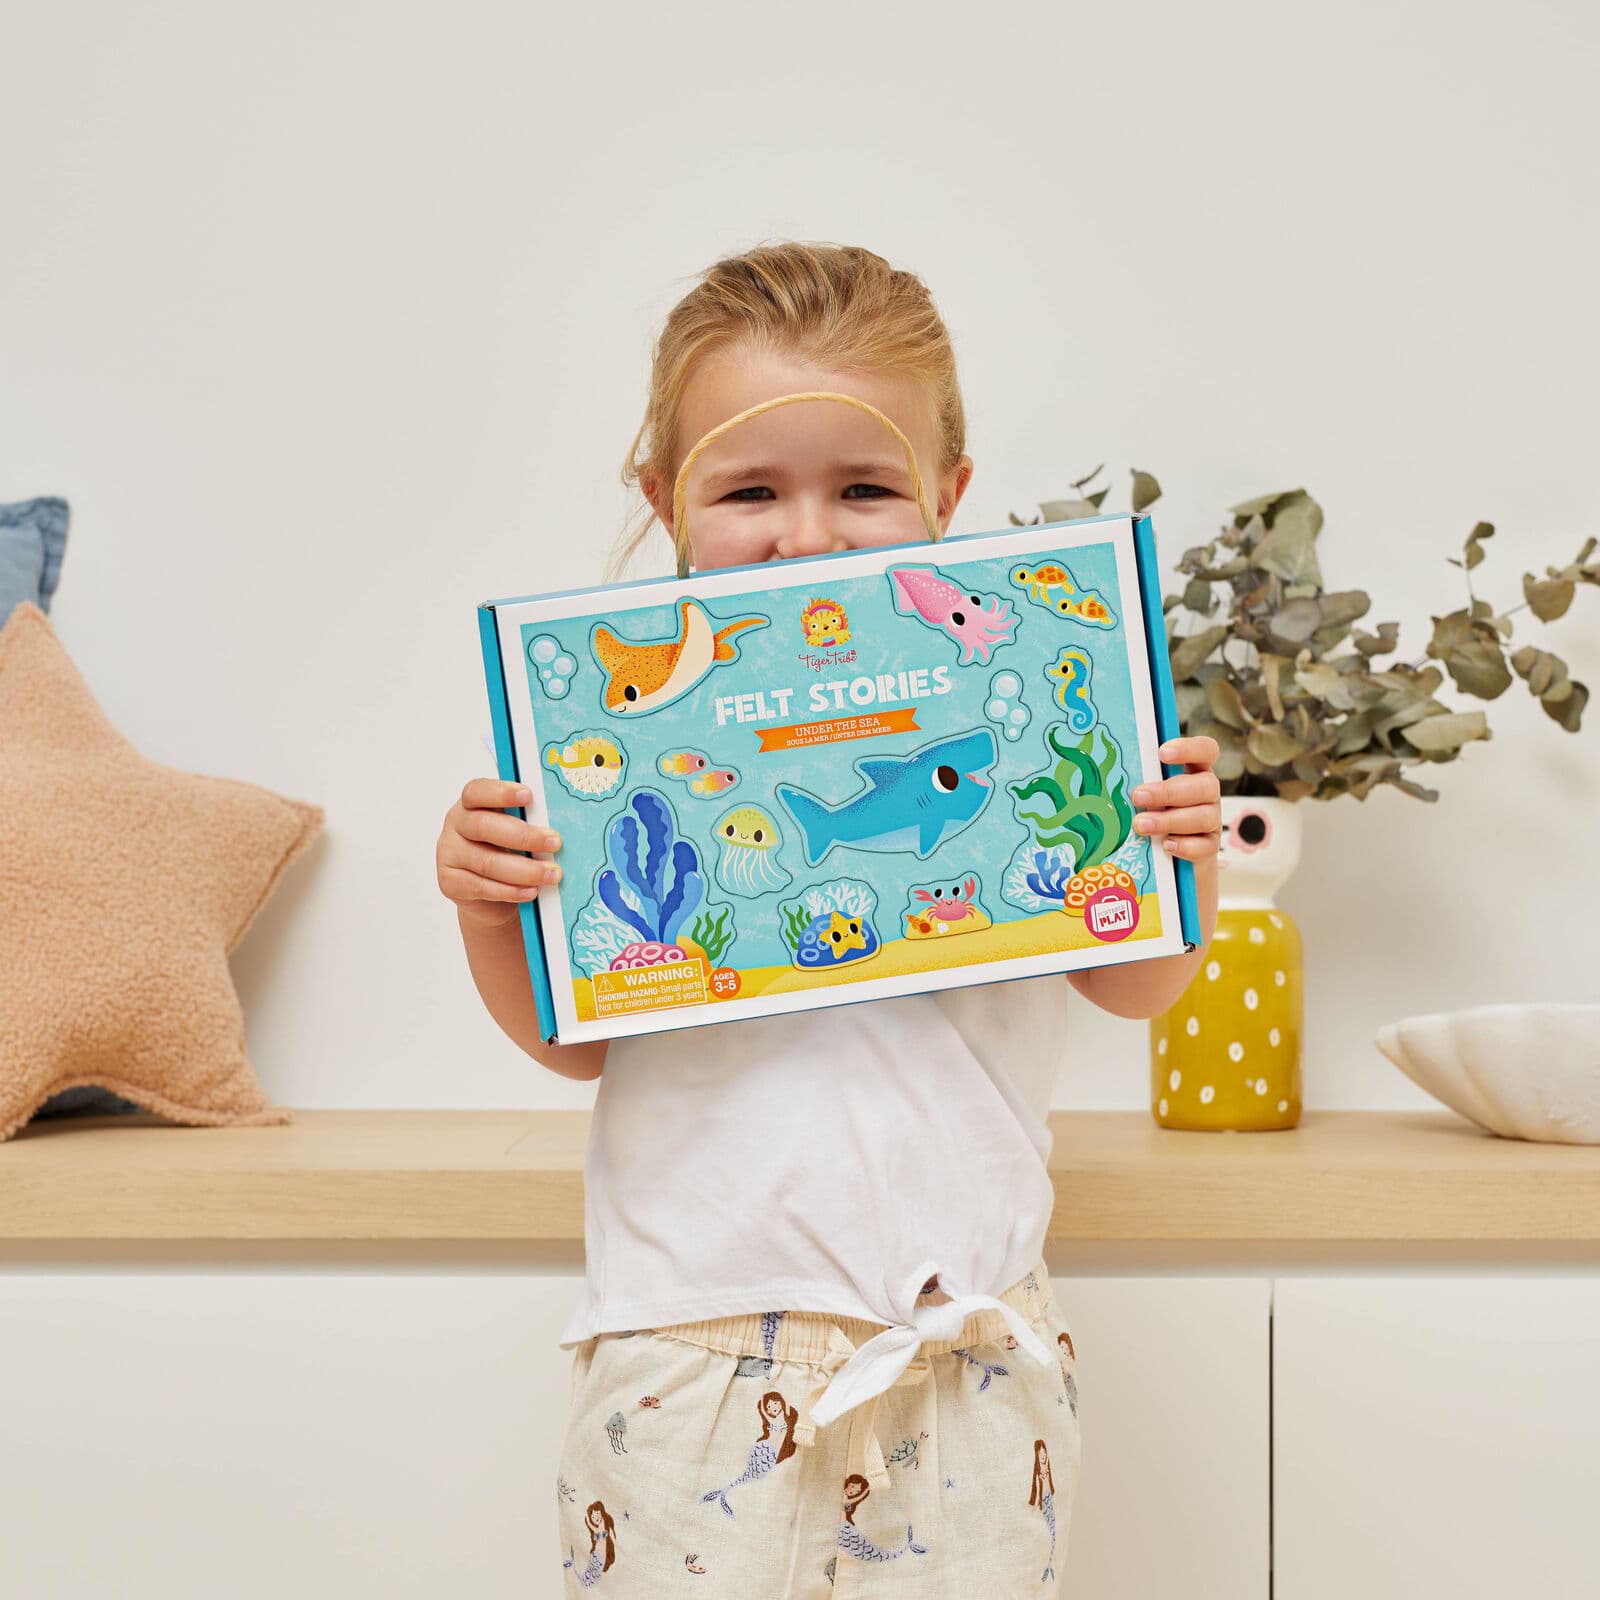 Tiger Tribe Felt Stories Under The Sea - lifestyle image with box